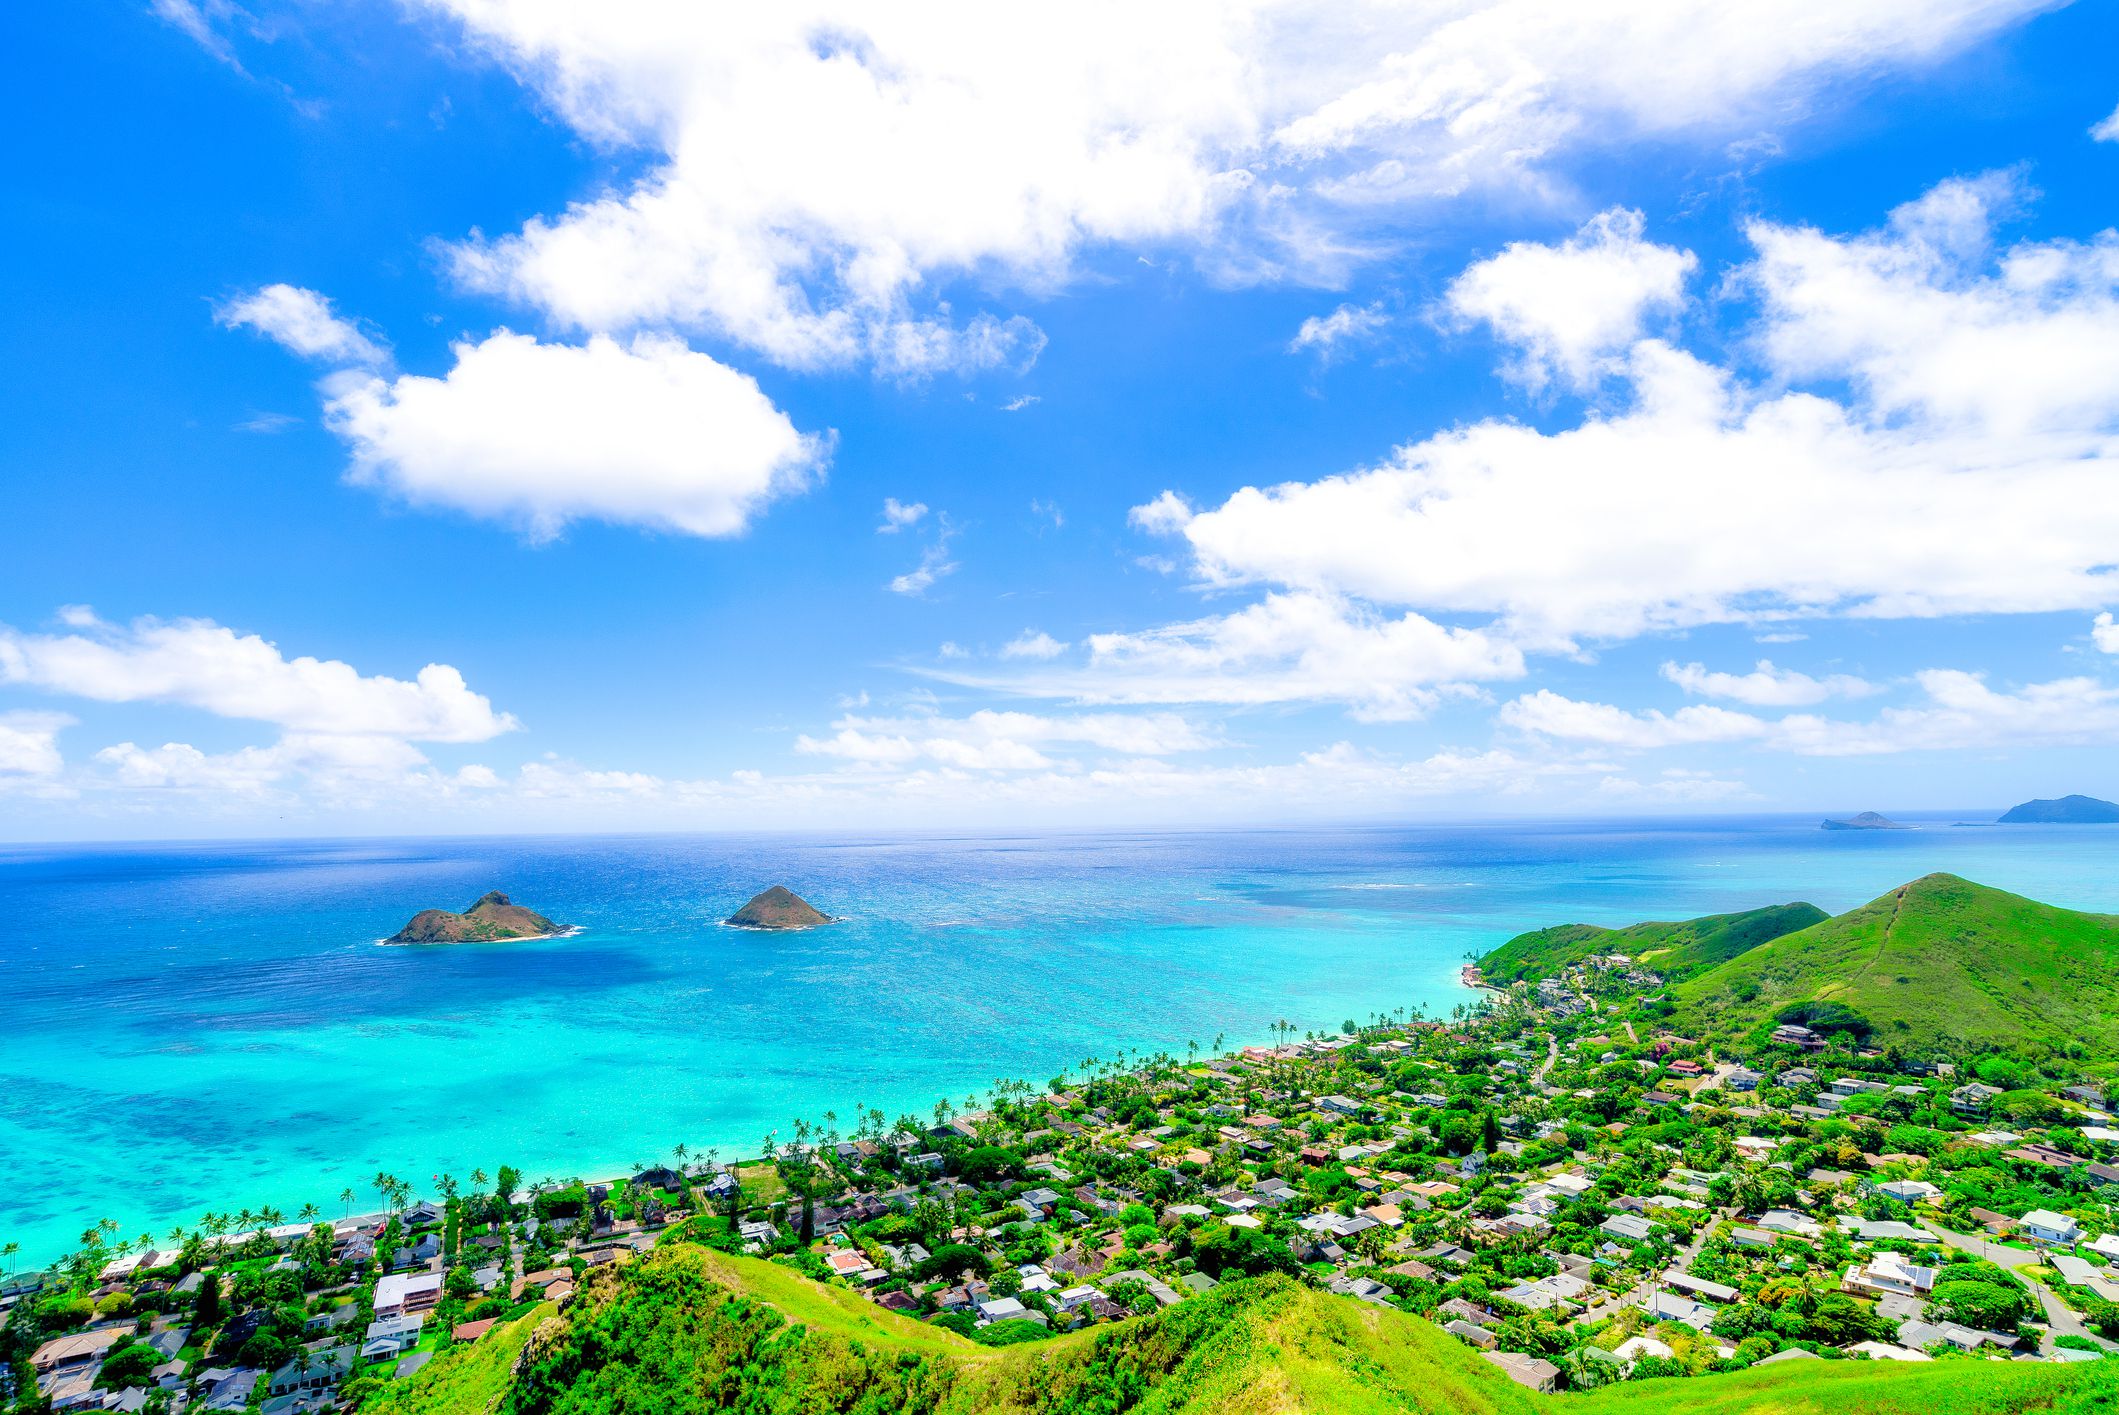 <p>Located on the eastern shores of Oahu, Kailua is a sleepier town with shops, restaurants and a local farmers market. World class beaches for walking, swimming, and shell collecting are a stone’s throw away. About 18% of the population is 65 or older.</p><ul><li>Population: 19,713</li><li>Median Household Income: $79,331</li><li>Cost of Living: 130% of U.S. average</li><li>Median Rent Price: $3,978</li><li>Home Price-to-Income Ratio: 16</li><li>Average Property Tax: 0.32%</li></ul><p class="padding-top-ms u-margin-bottom-ms"><b>Housing Affordability: </b>This prime retirement spot is among the pricier places to live on our list. Average rents here are creeping toward $4,000 per month. And home values top $1,300,000. Apartments do come on the market for less than $700,000, and retirees on a tight budget who are interested in moving to Kailua will need to spend some time waiting for a relatively affordable home to come on the market.</p>